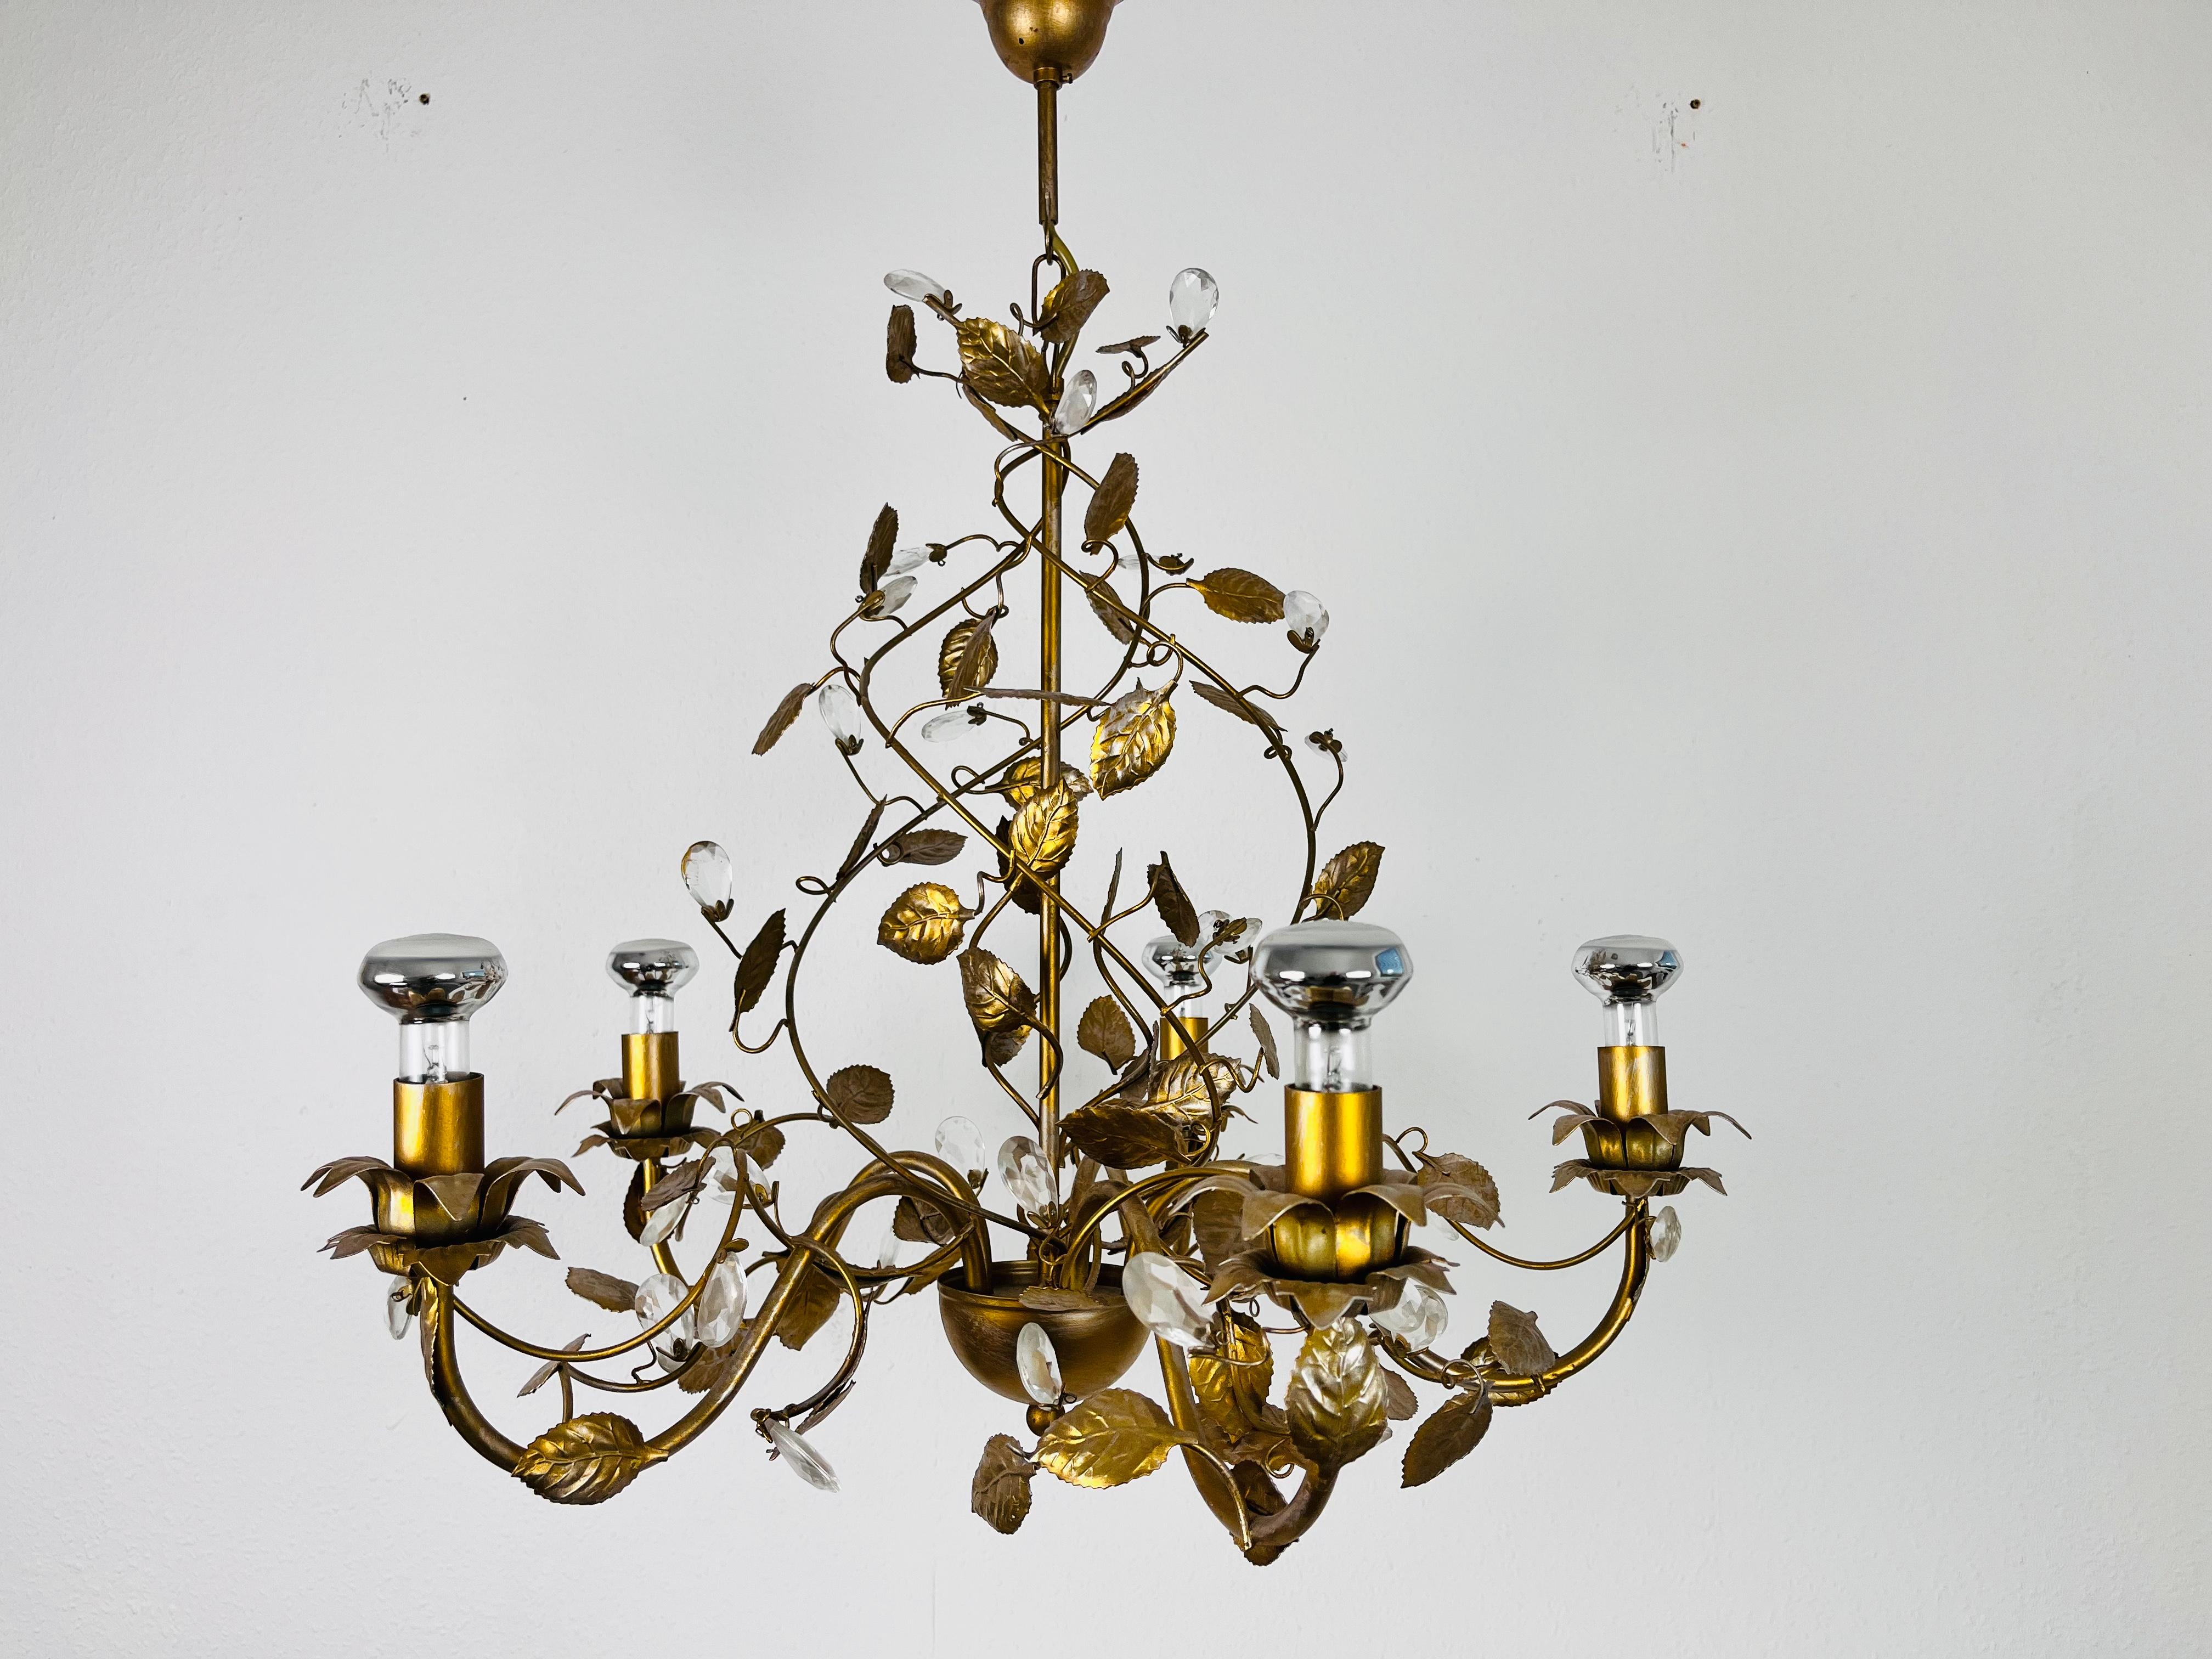 An extraordinary pendant lamp by the German designer Hans Kögl made in Germany in the 1970s. The lamp has a beautiful wheat sheaf design. It is made in the period of Hollywood Regency.

The light requires E14 light bulbs. Works with both 120/220V.